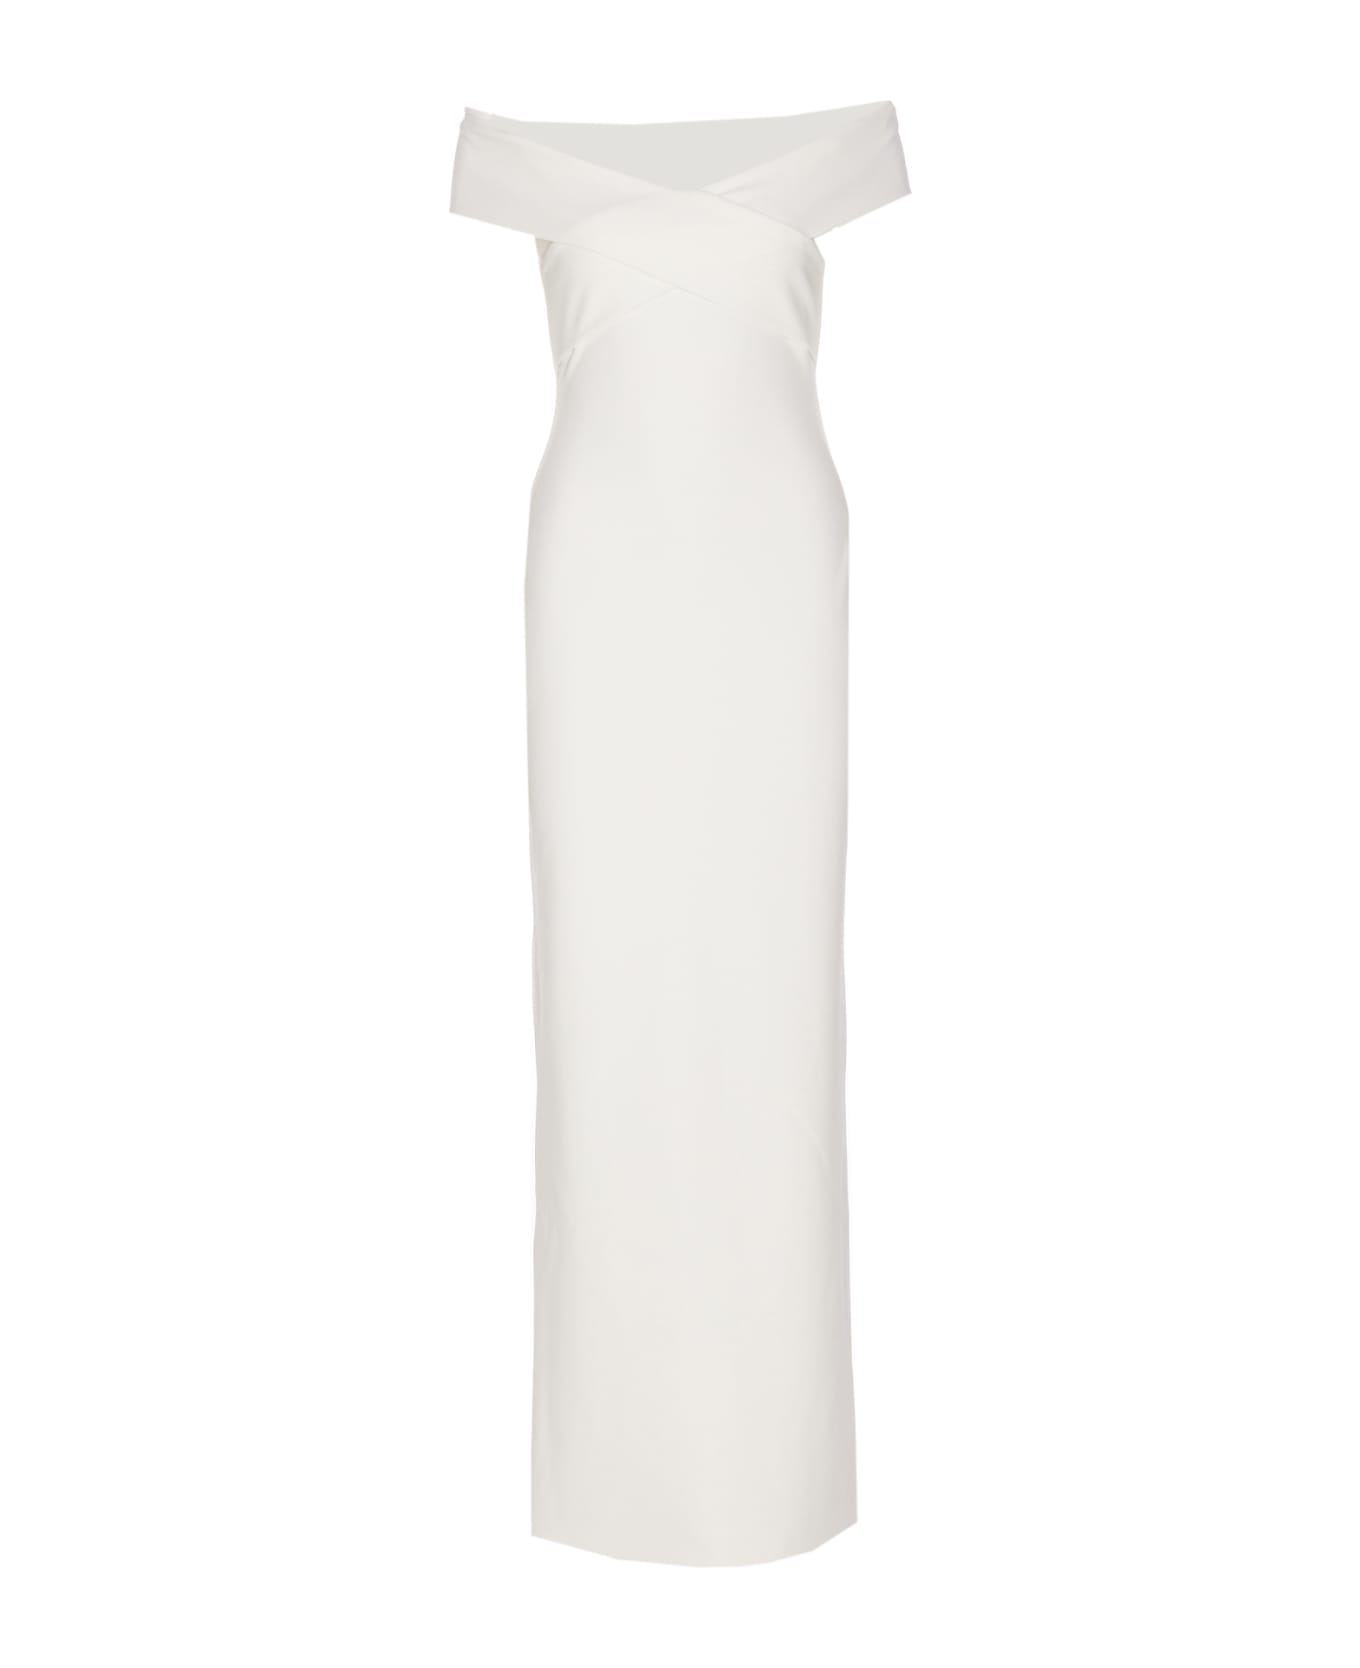 Solace London Ines Maxi Dress - White